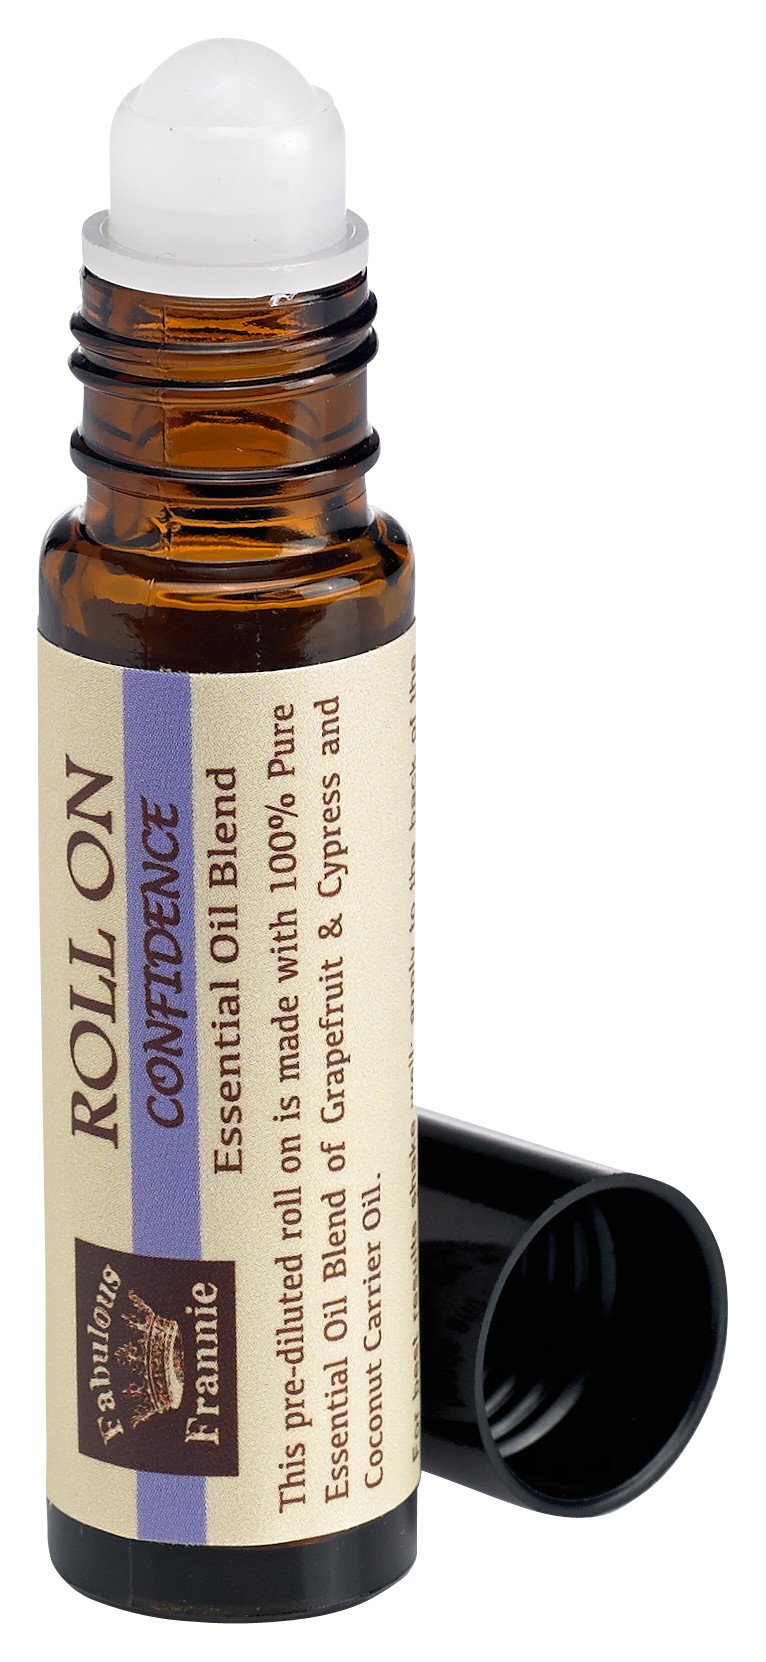 Confidence Essential Oil Blend Roll-On 10 ml - Roll-Ons - Essential Oils -  Natural Essential Oil Products by Fabulous Frannie